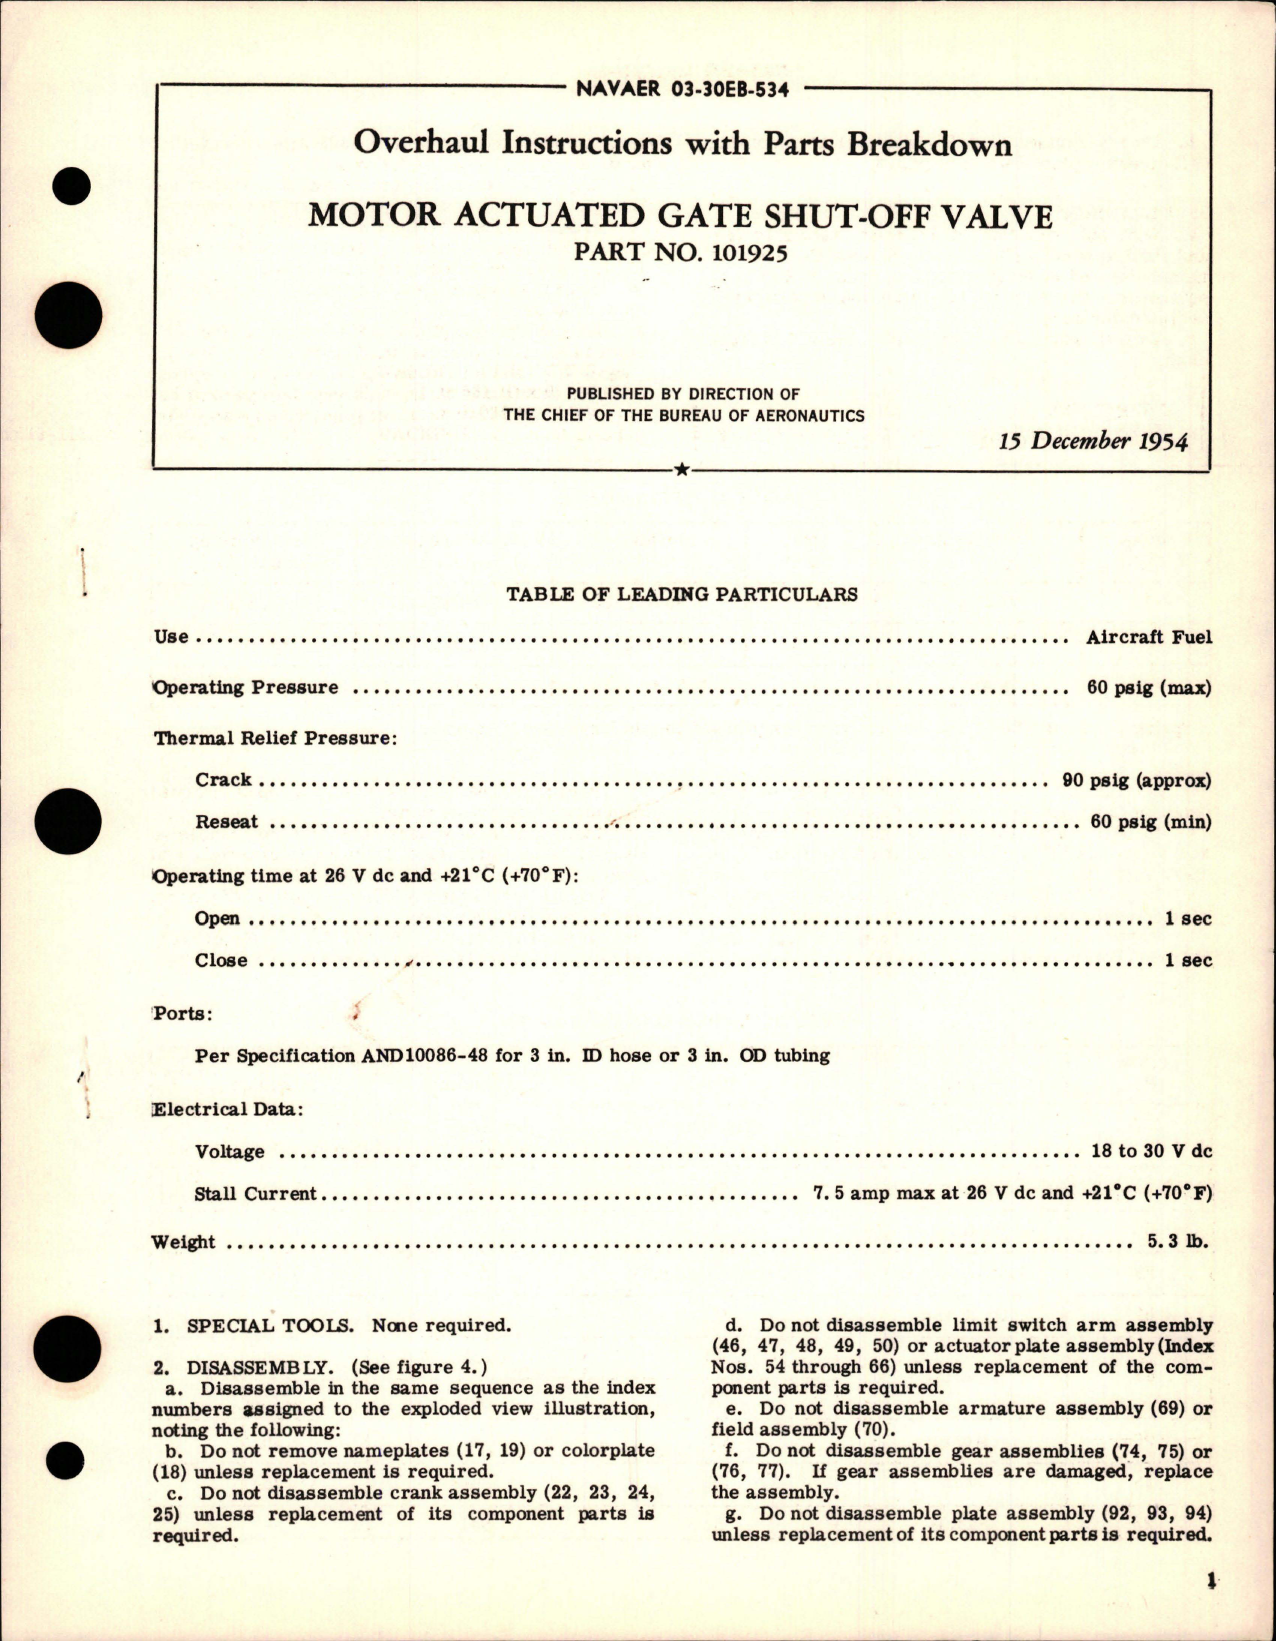 Sample page 1 from AirCorps Library document: Overhaul Instructions with Parts for Motor Actuated Gate Shut Off Valve - Part 101925